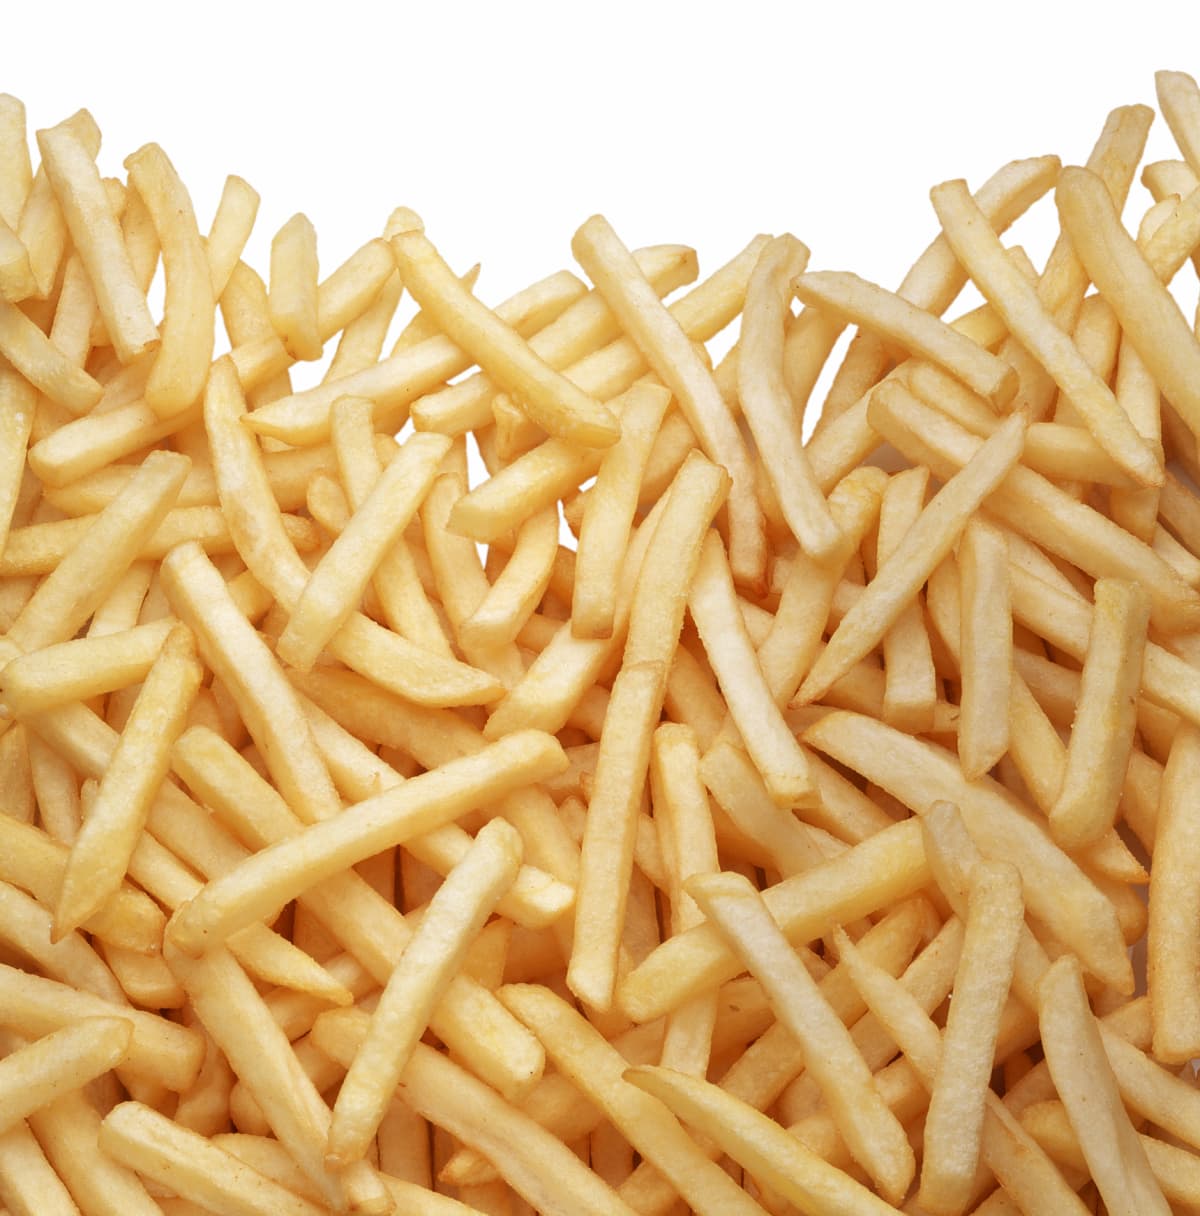 French fries on a white background